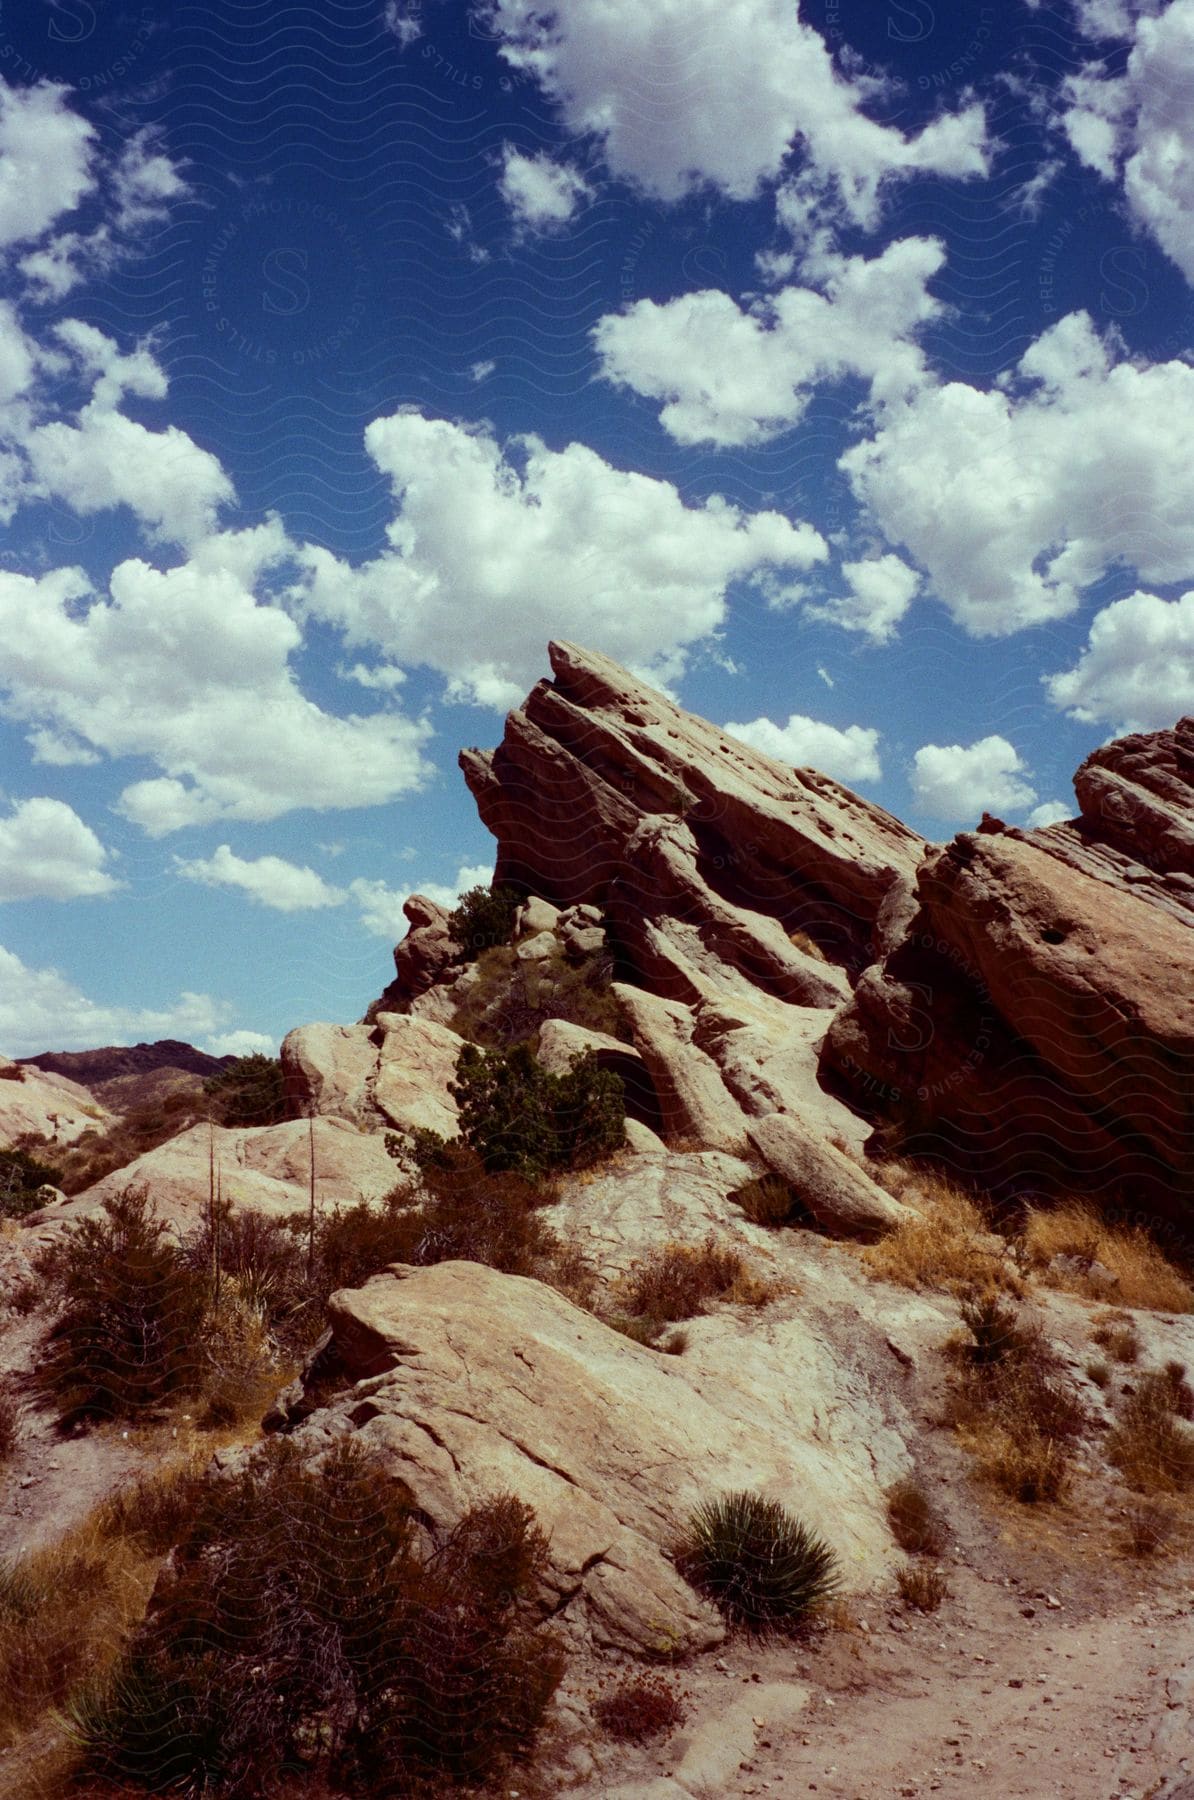 White fluffy clouds in the bright blue sky above the Vasquez Rocks